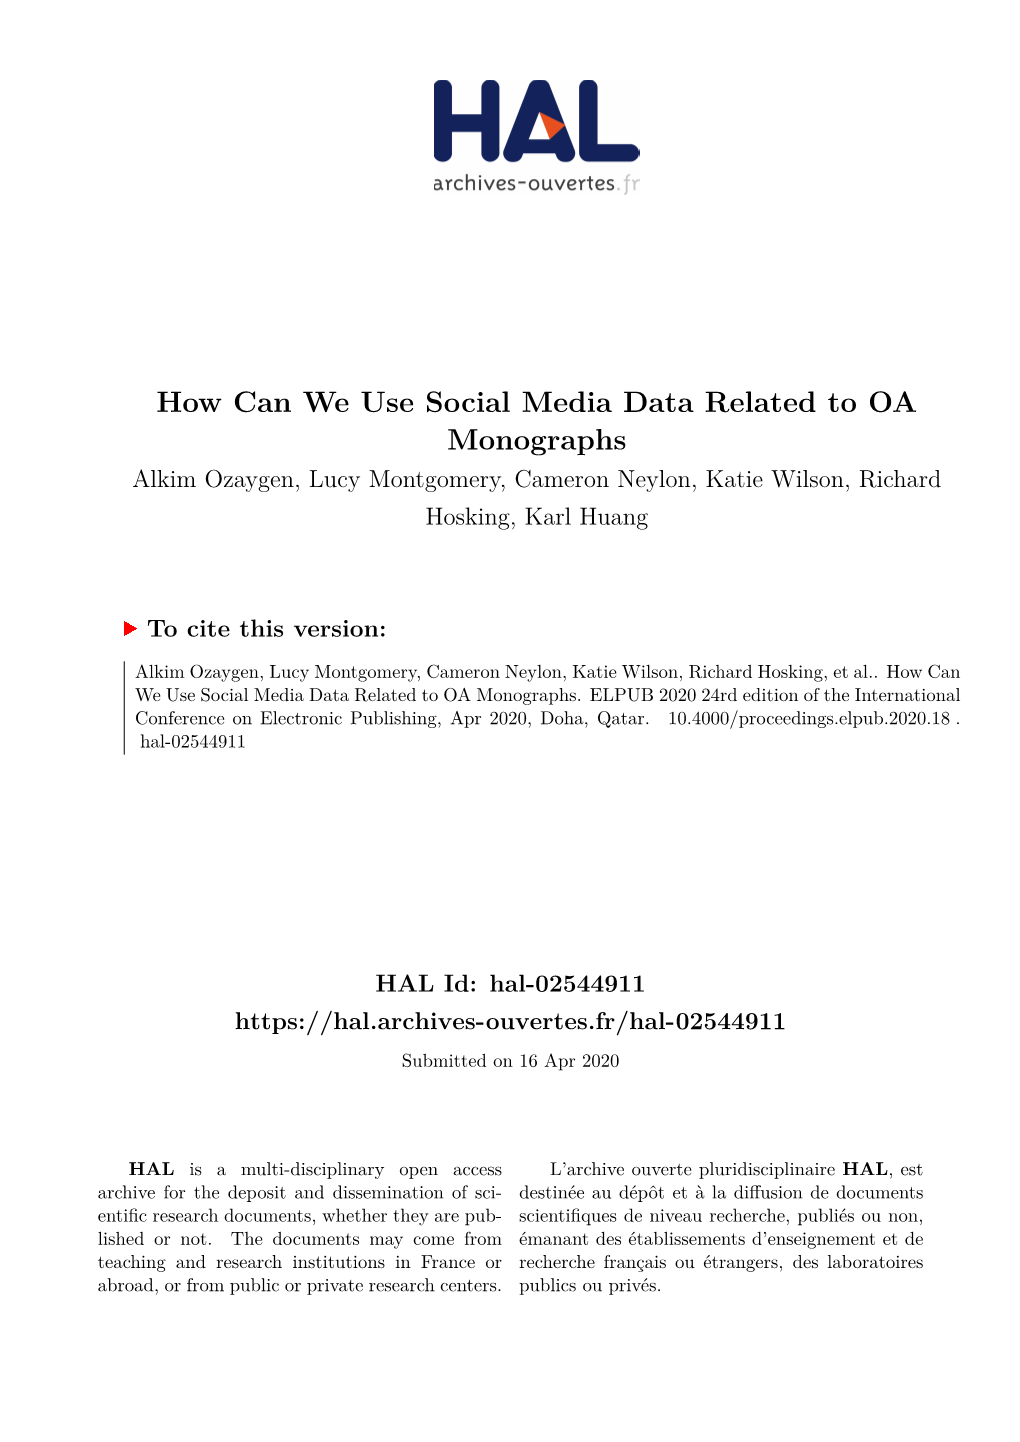 How Can We Use Social Media Data Related to OA Monographs Alkim Ozaygen, Lucy Montgomery, Cameron Neylon, Katie Wilson, Richard Hosking, Karl Huang